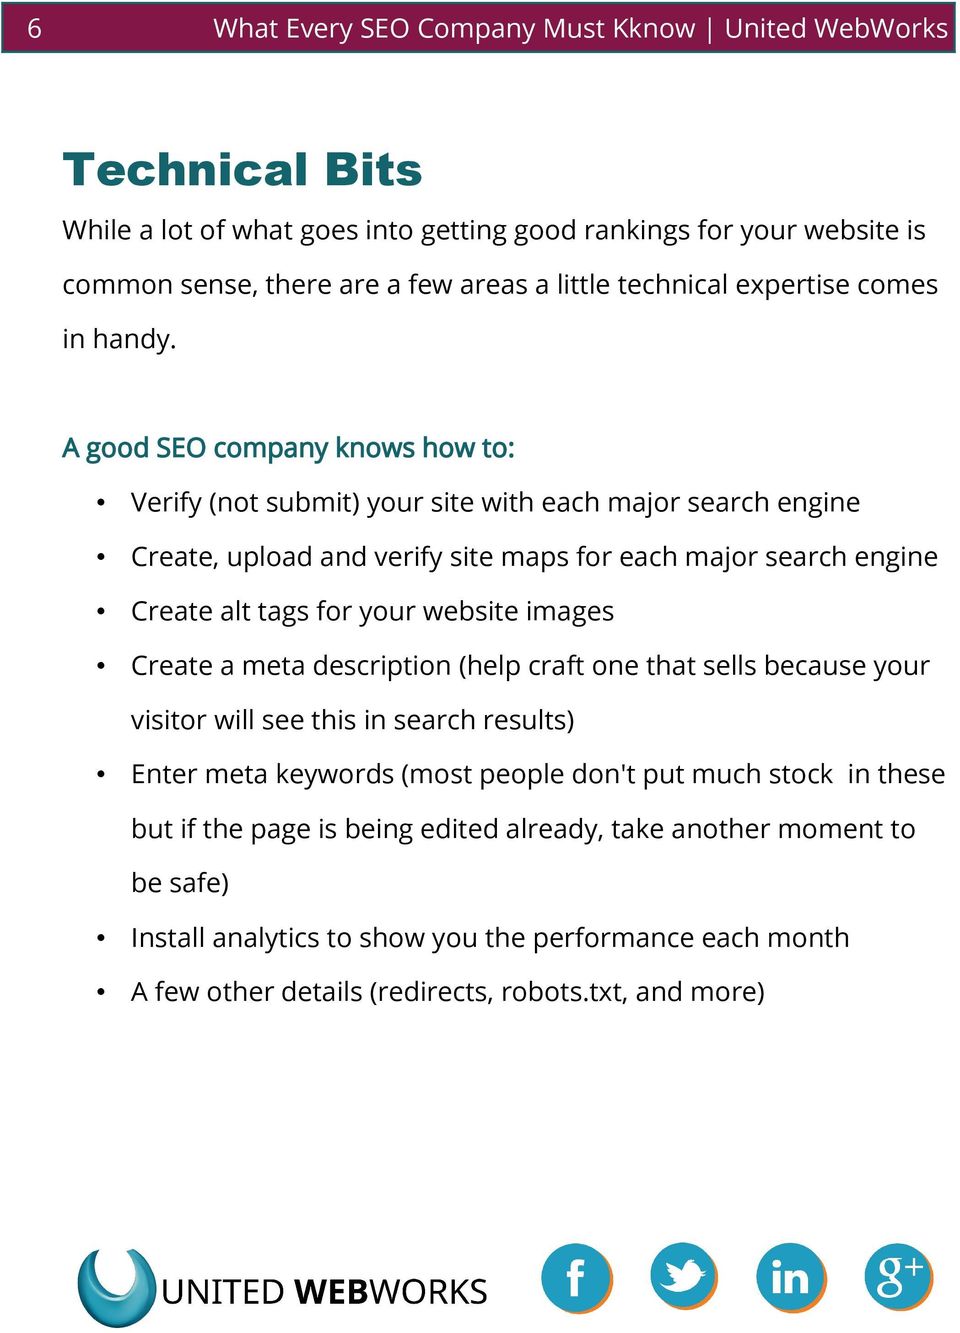 A good SEO company knows how to: Verify (not submit) your site with each major search engine Create, upload and verify site maps for each major search engine Create alt tags for your website